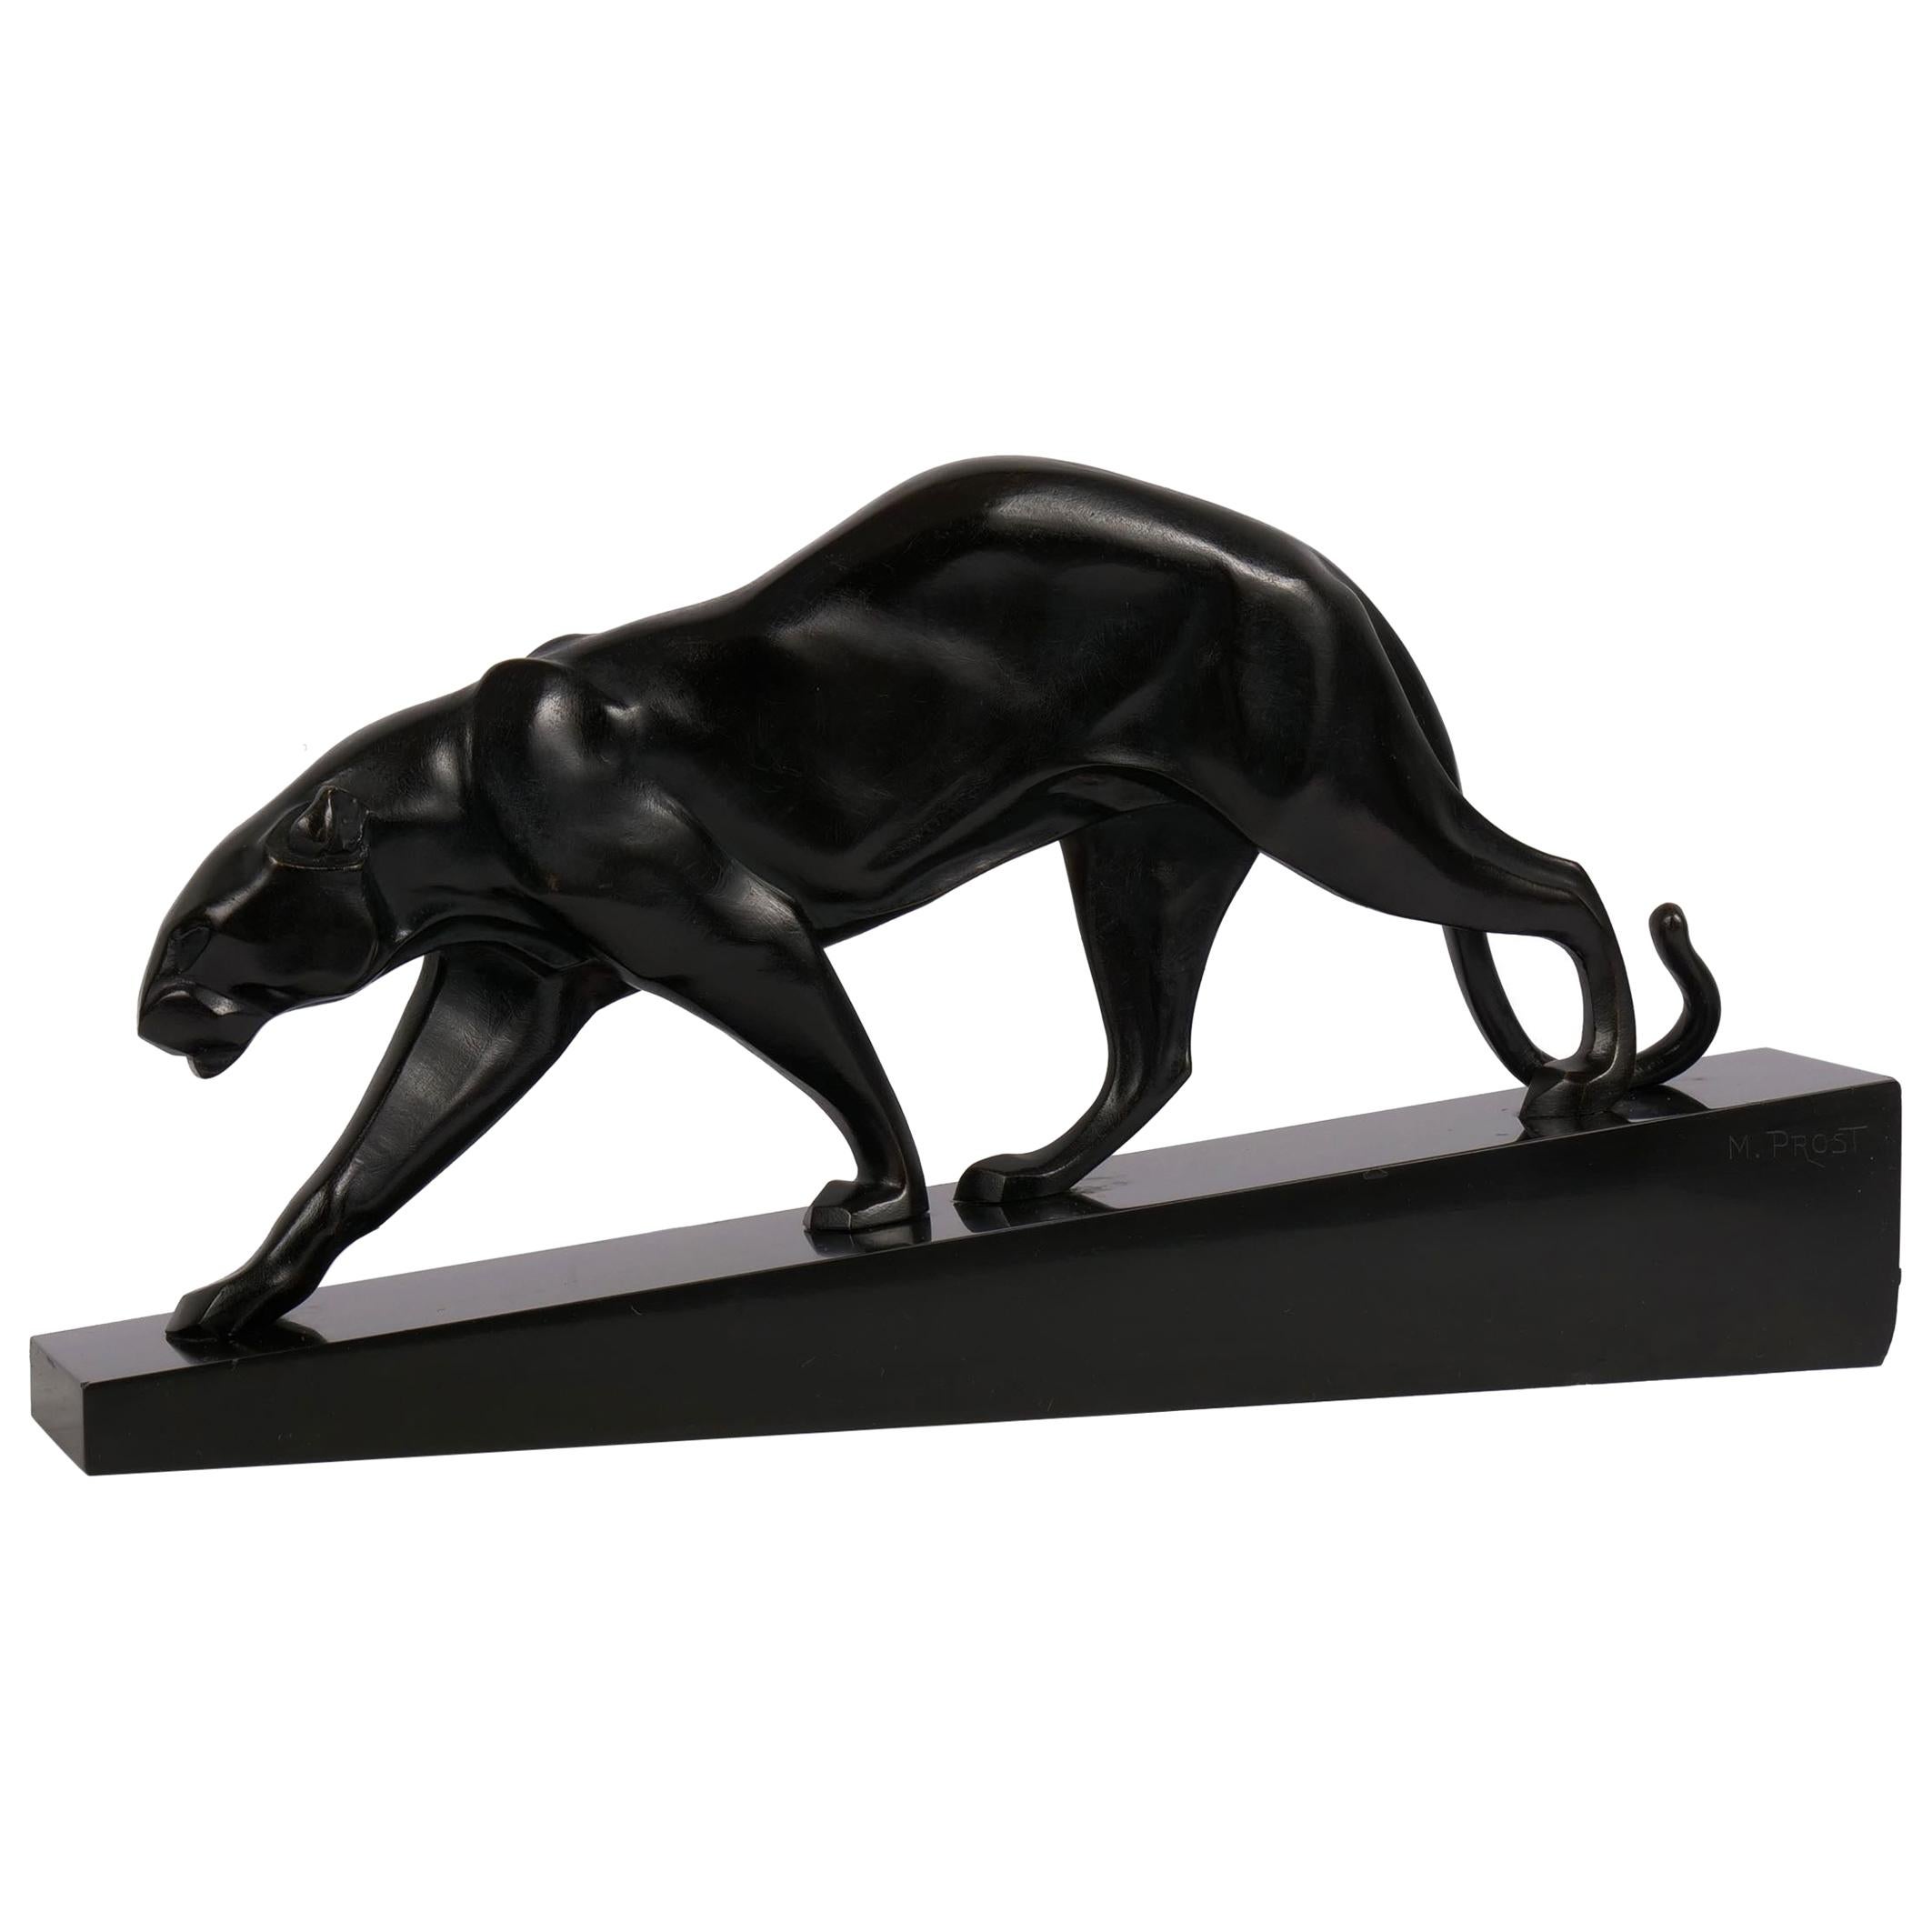 Art Deco “Panther Walking” French Bronze Sculpture by Maurice Prost & S. Freres